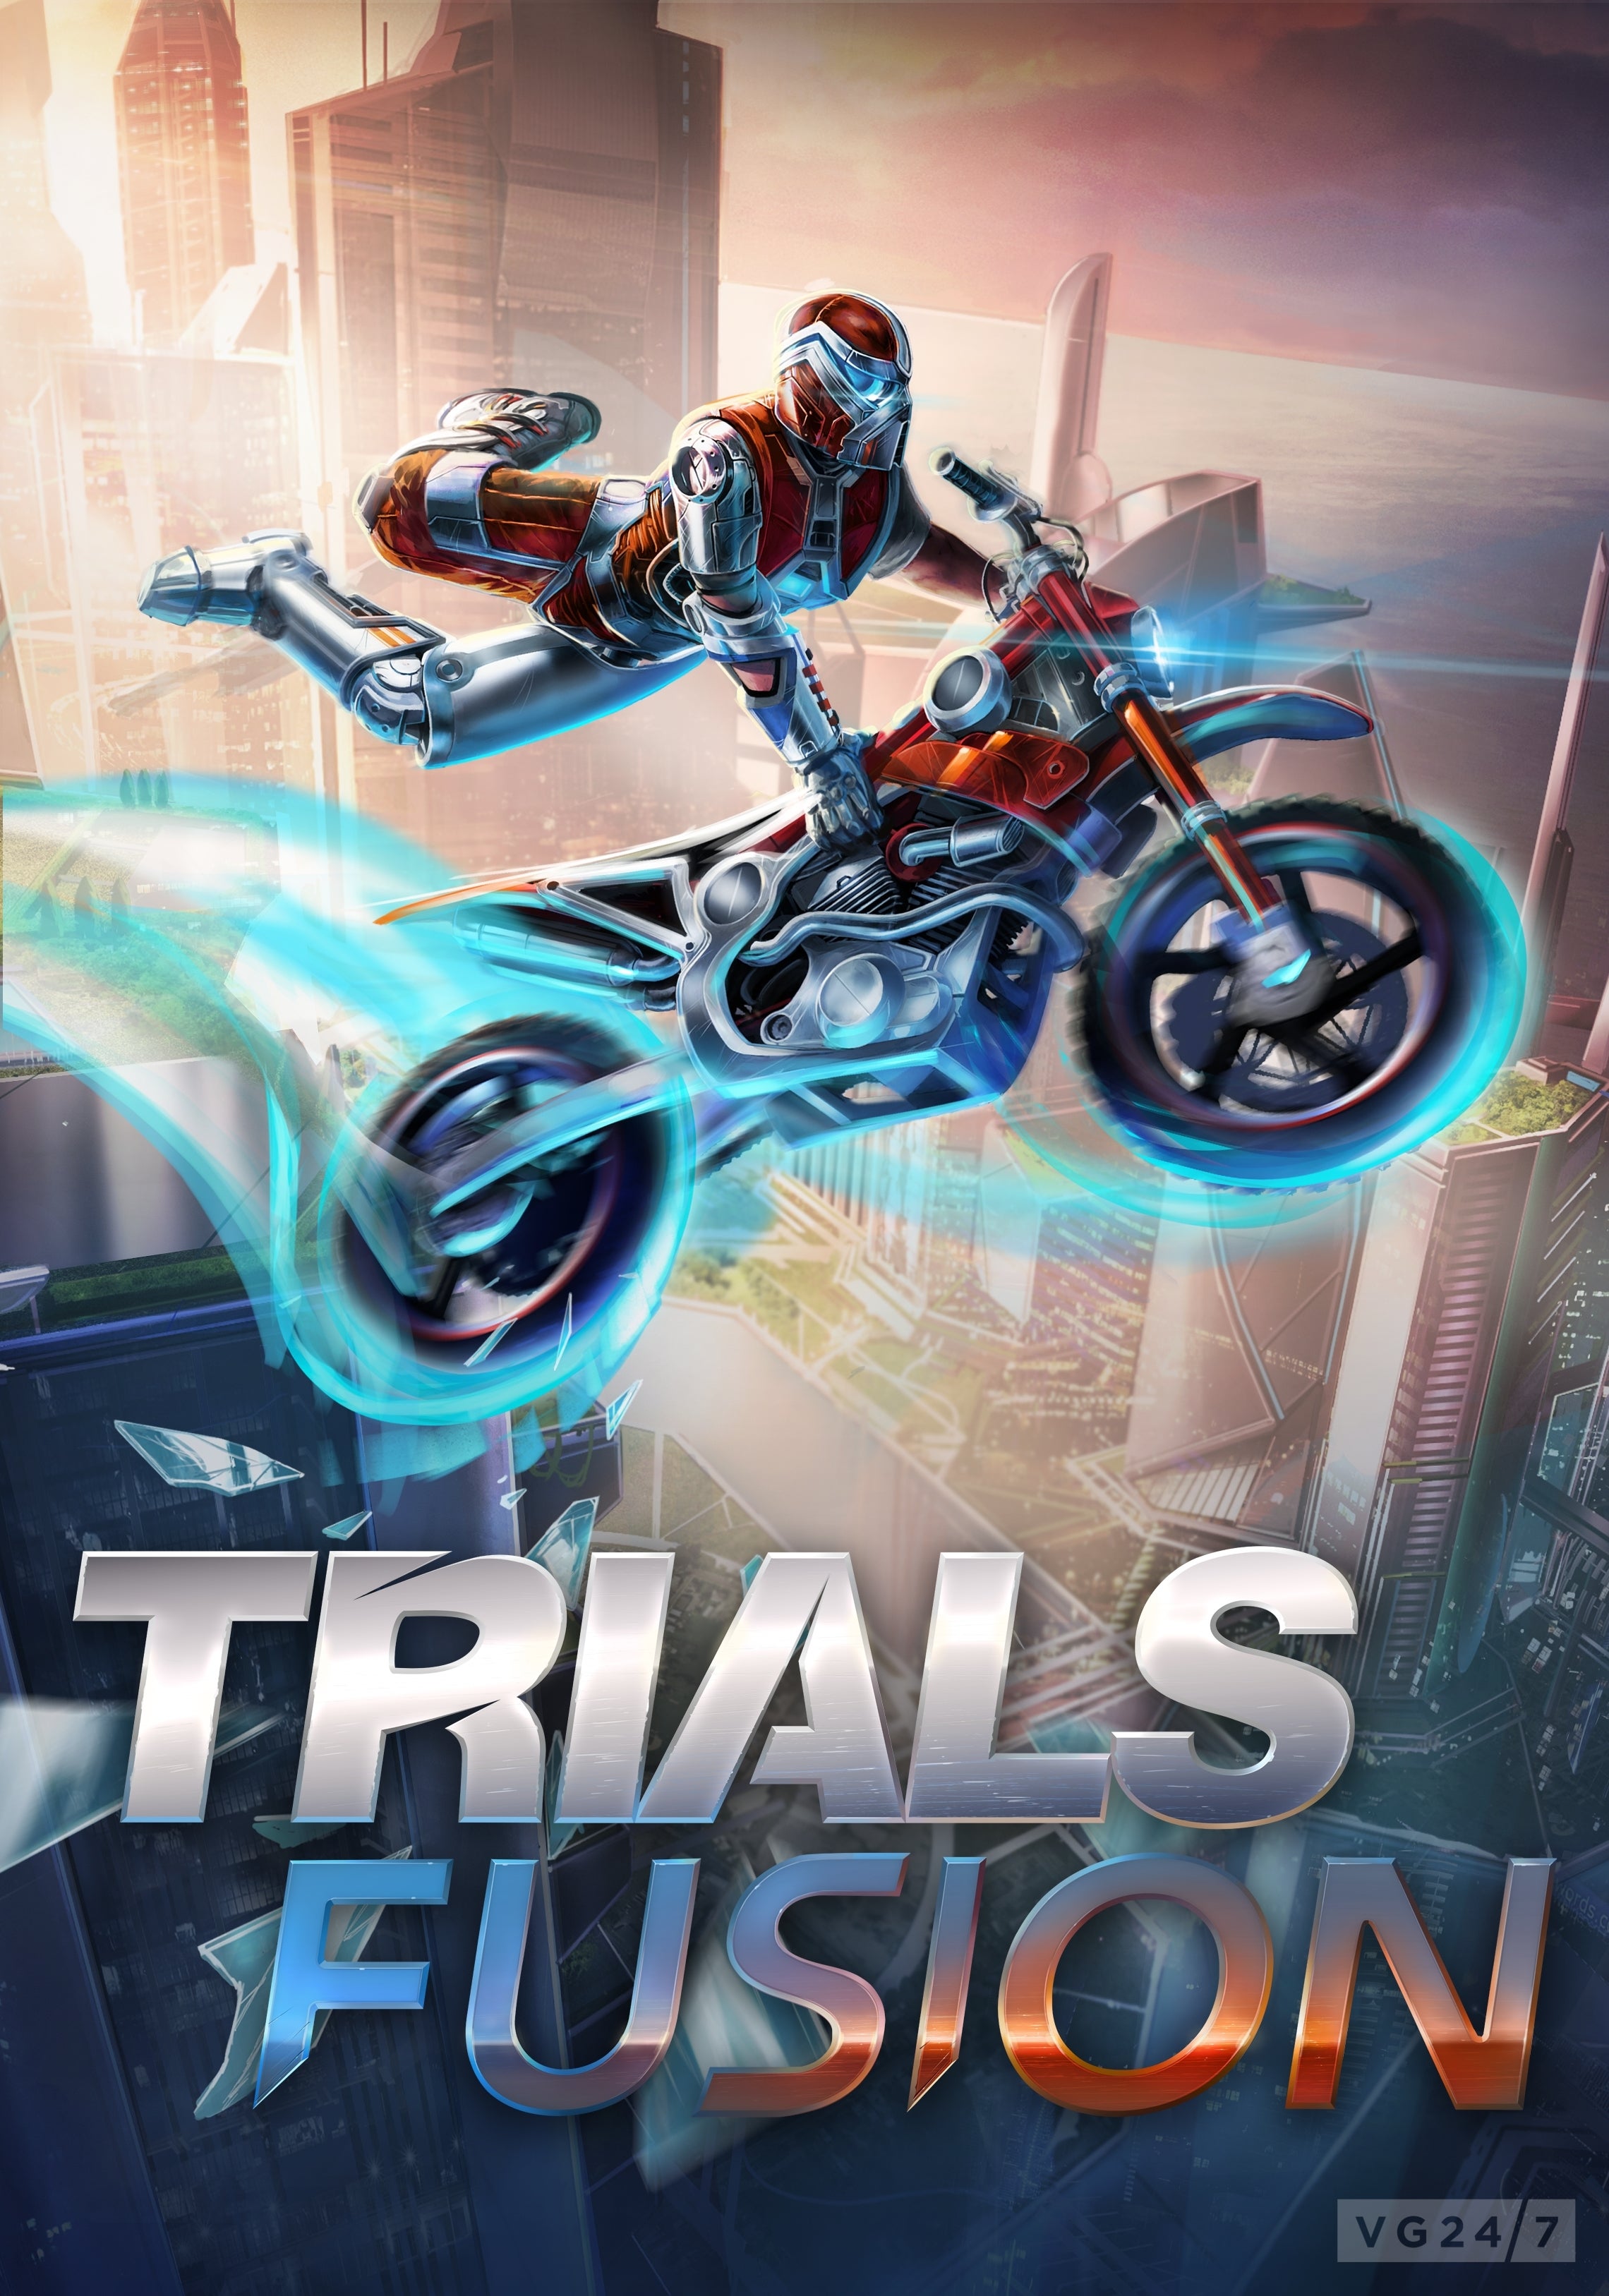 Image for Trial Fusion closed beta footage shows tricks, jumps, tracks 